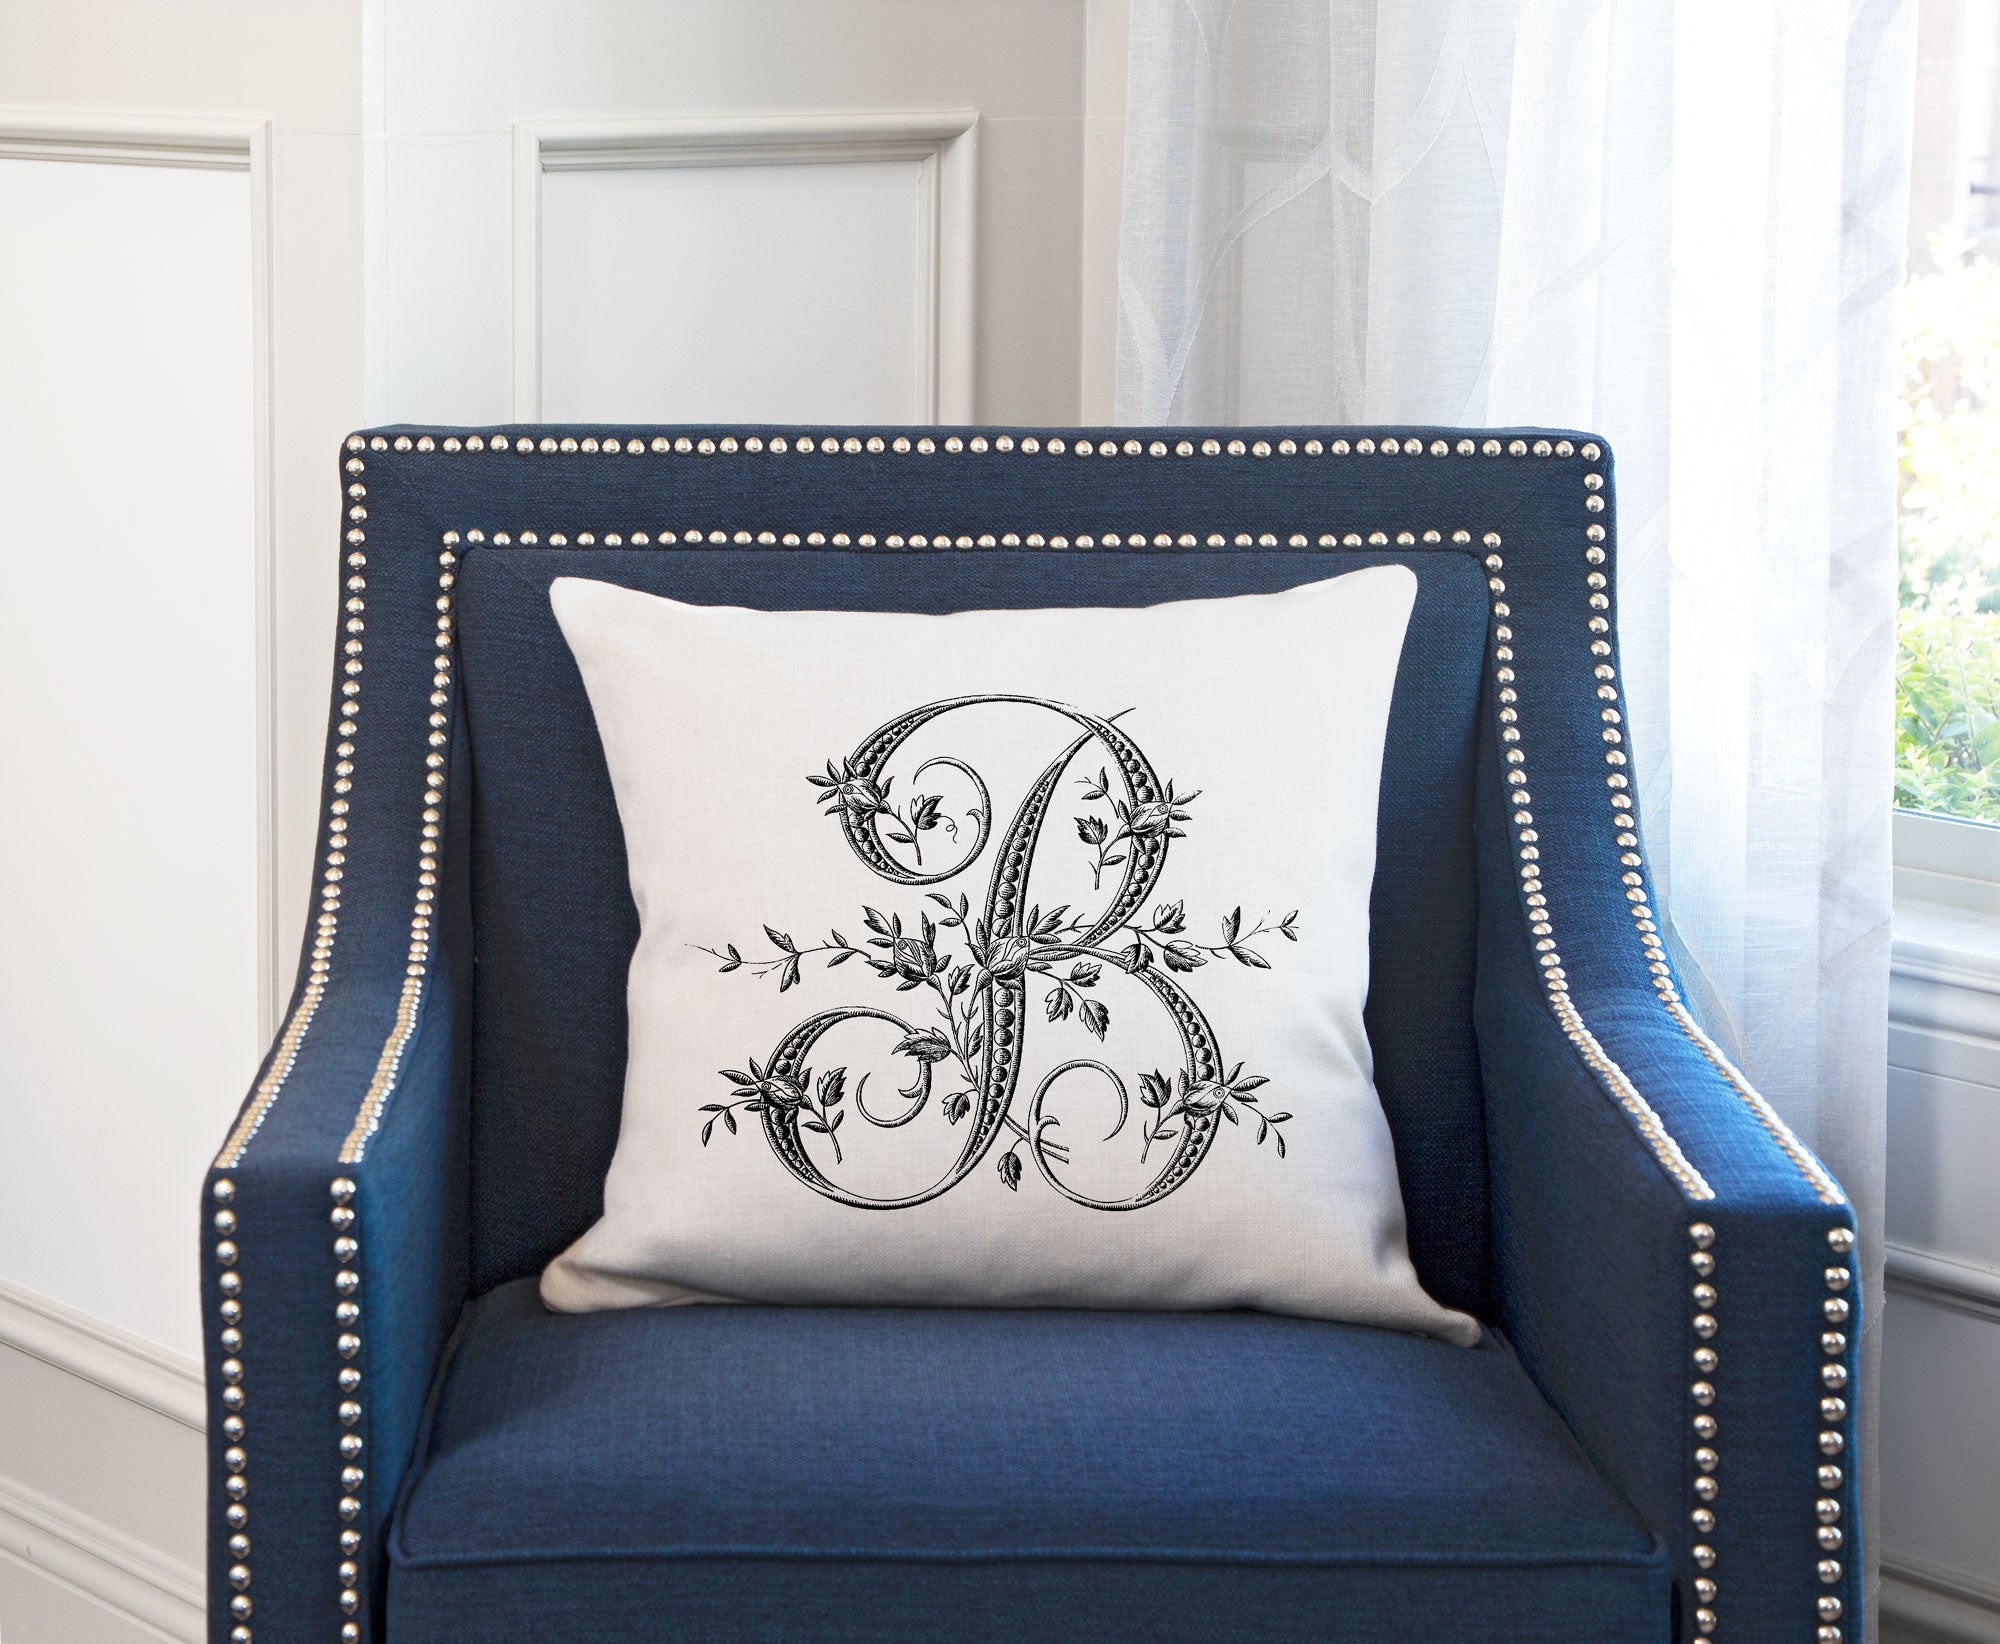 Vintage French Monogram Letter B Throw Pillow Cover